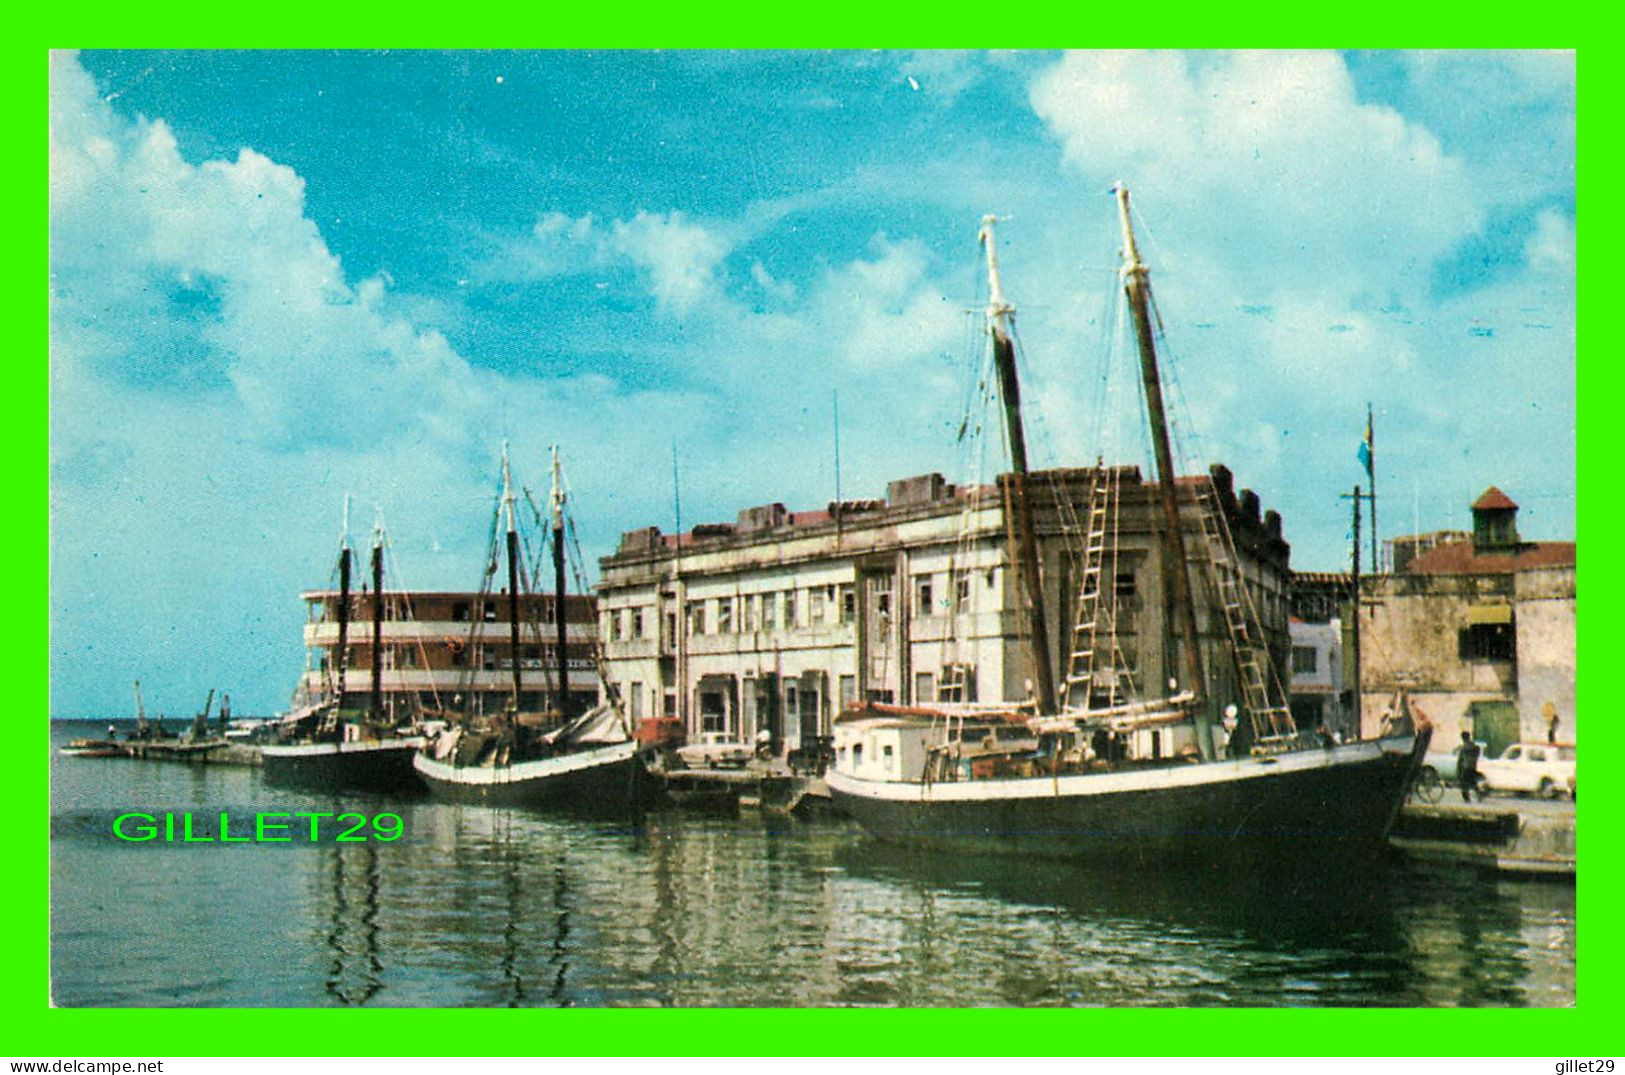 BARBADOS, B.W.I. - WHARF, BRIDGETOWN - PHOTO BTY S. O'DONELL - C. L. PITT & CO LTD - ANIMATED WITH BOATS - - Barbados